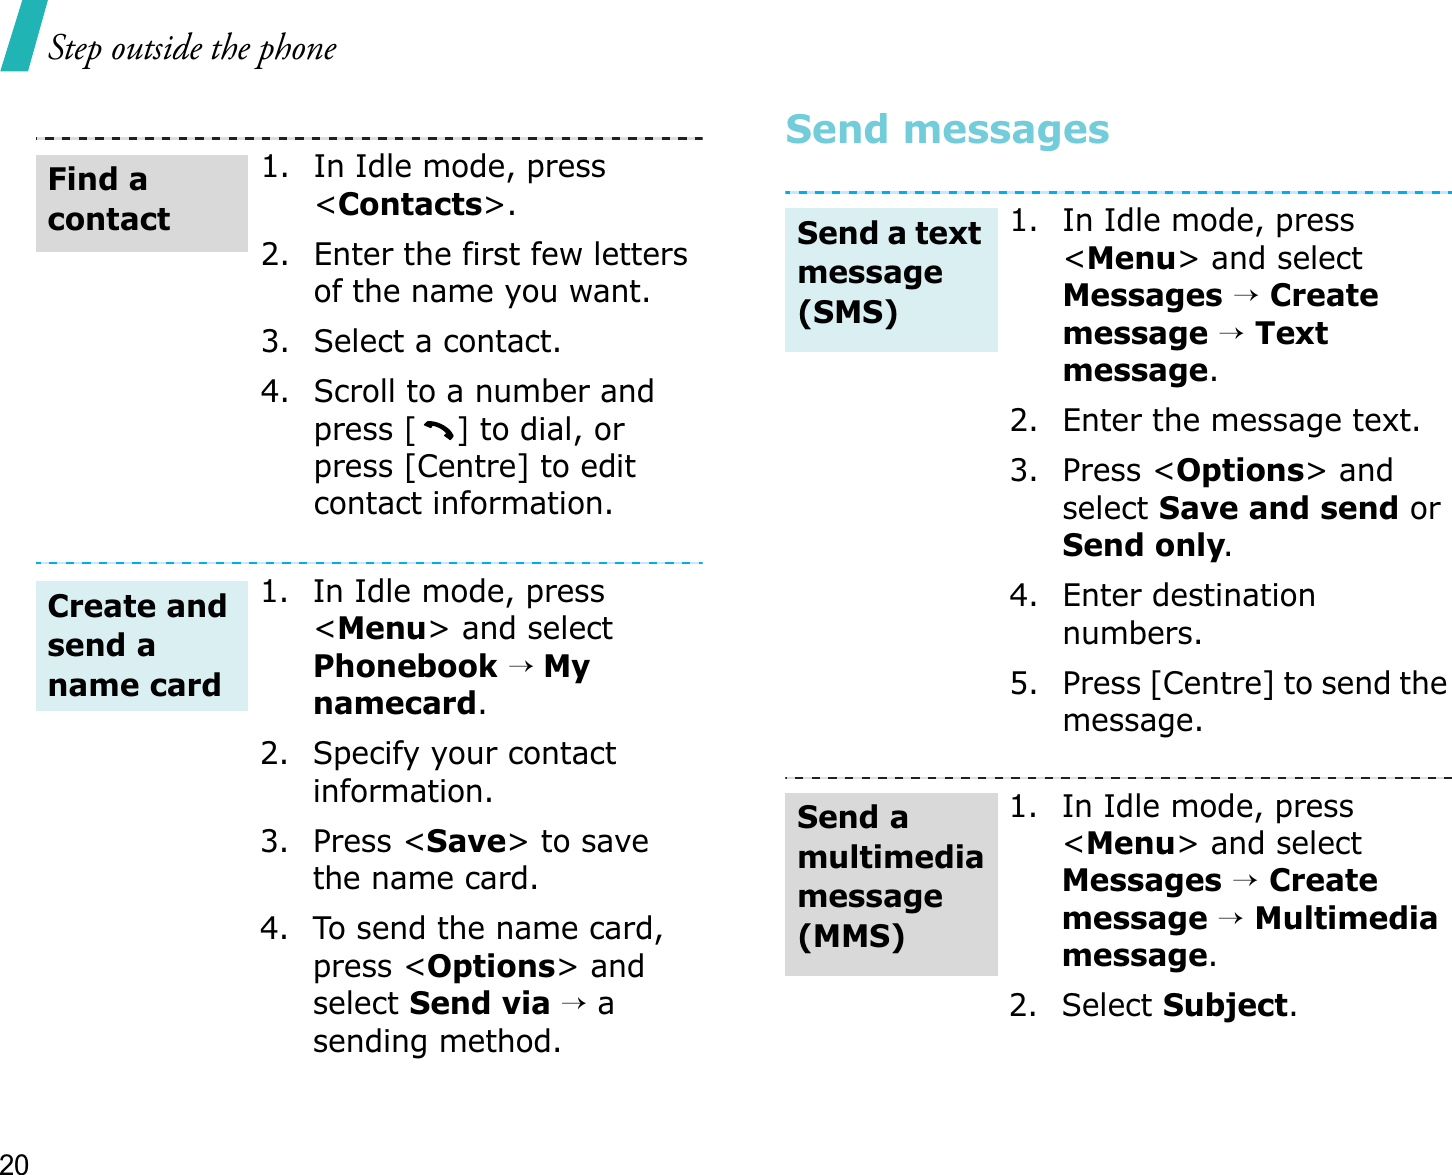 Step outside the phone20Send messages1. In Idle mode, press &lt;Contacts&gt;.2. Enter the first few letters of the name you want.3. Select a contact.4. Scroll to a number and press [] to dial, or press [Centre] to edit contact information.1. In Idle mode, press &lt;Menu&gt; and select Phonebook→ Mynamecard.2. Specify your contact information.3. Press &lt;Save&gt; to save the name card.4. To send the name card, press &lt;Options&gt; and select Send via →asending method.Find a contactCreate and send a name card1. In Idle mode, press &lt;Menu&gt; and select Messages→Createmessage →Text message.2. Enter the message text.3. Press &lt;Options&gt; and select Save and send or Send only.4. Enter destination numbers.5. Press [Centre] to send the message.1. In Idle mode, press &lt;Menu&gt; and select Messages→Createmessage →Multimedia message.2. Select Subject.Send a text message (SMS)Send a multimedia message (MMS)